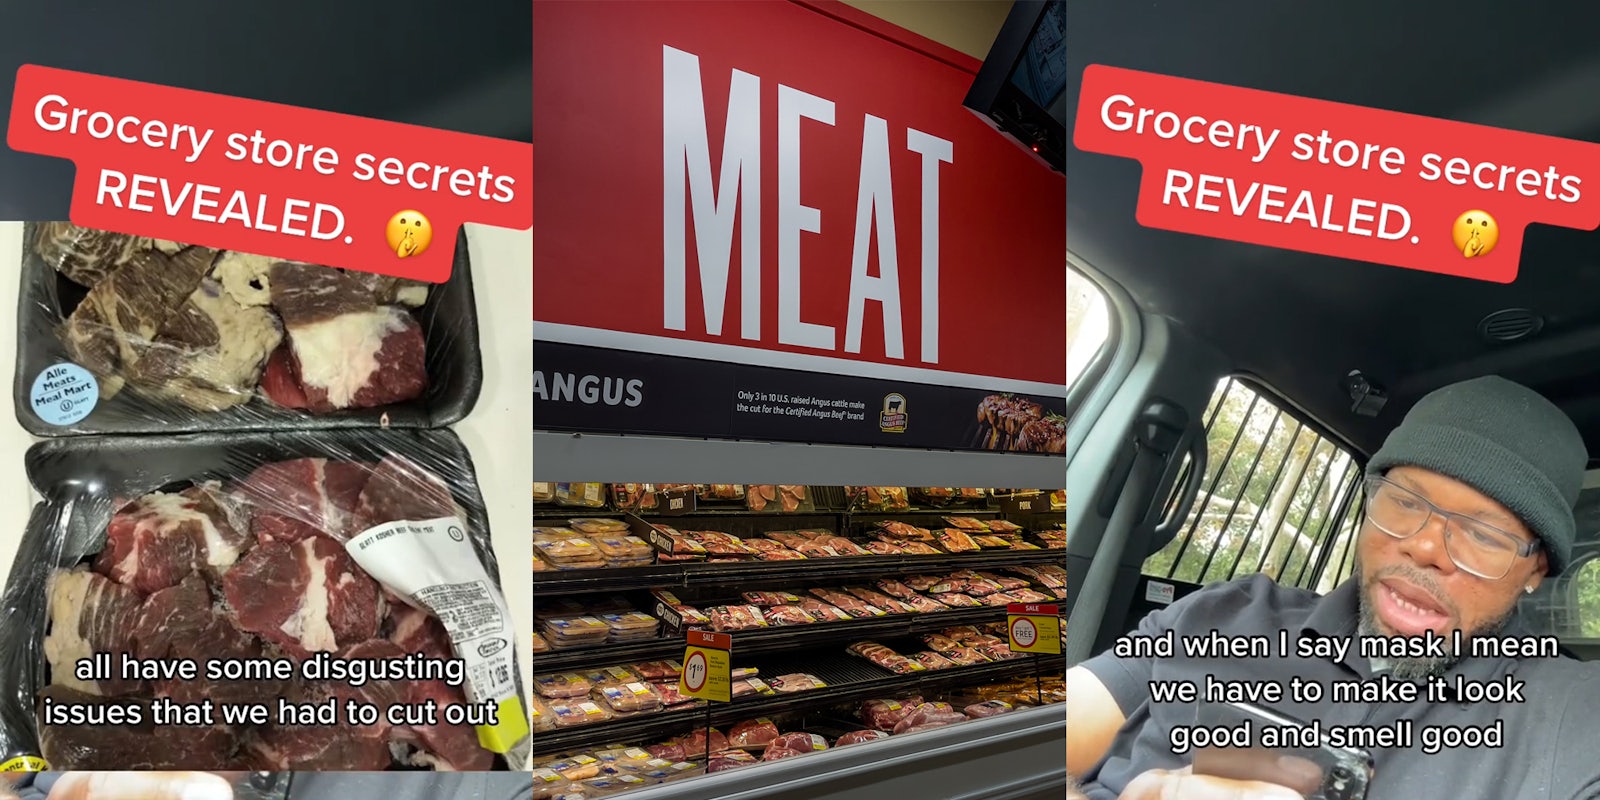 man speaking in car with caption 'Grocery store secrets REVEALED. all have some disgusting issues that we had to cut out' over image of meat (l) meat product display in grocery store with sign (c) man speaking in car with caption 'Grocery store secrets REVEALED. and when I say mask I mean we have to make it look good and smell good' (r)